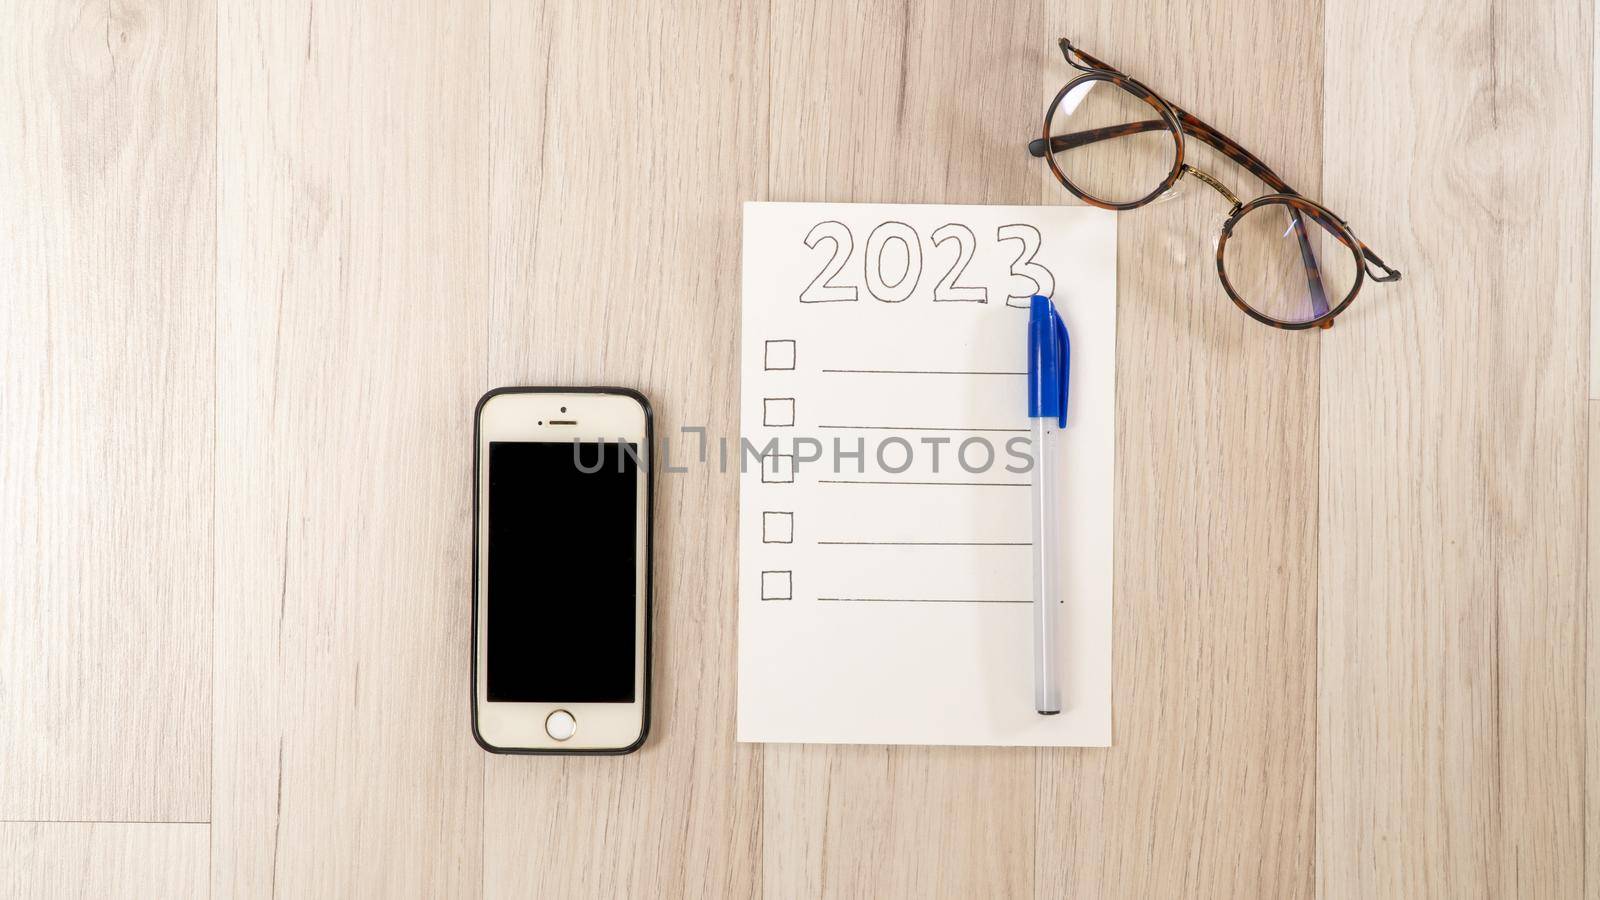 Checklist for 2023, smartphone and glasses on a wooden table, to-do list for the new year by voktybre